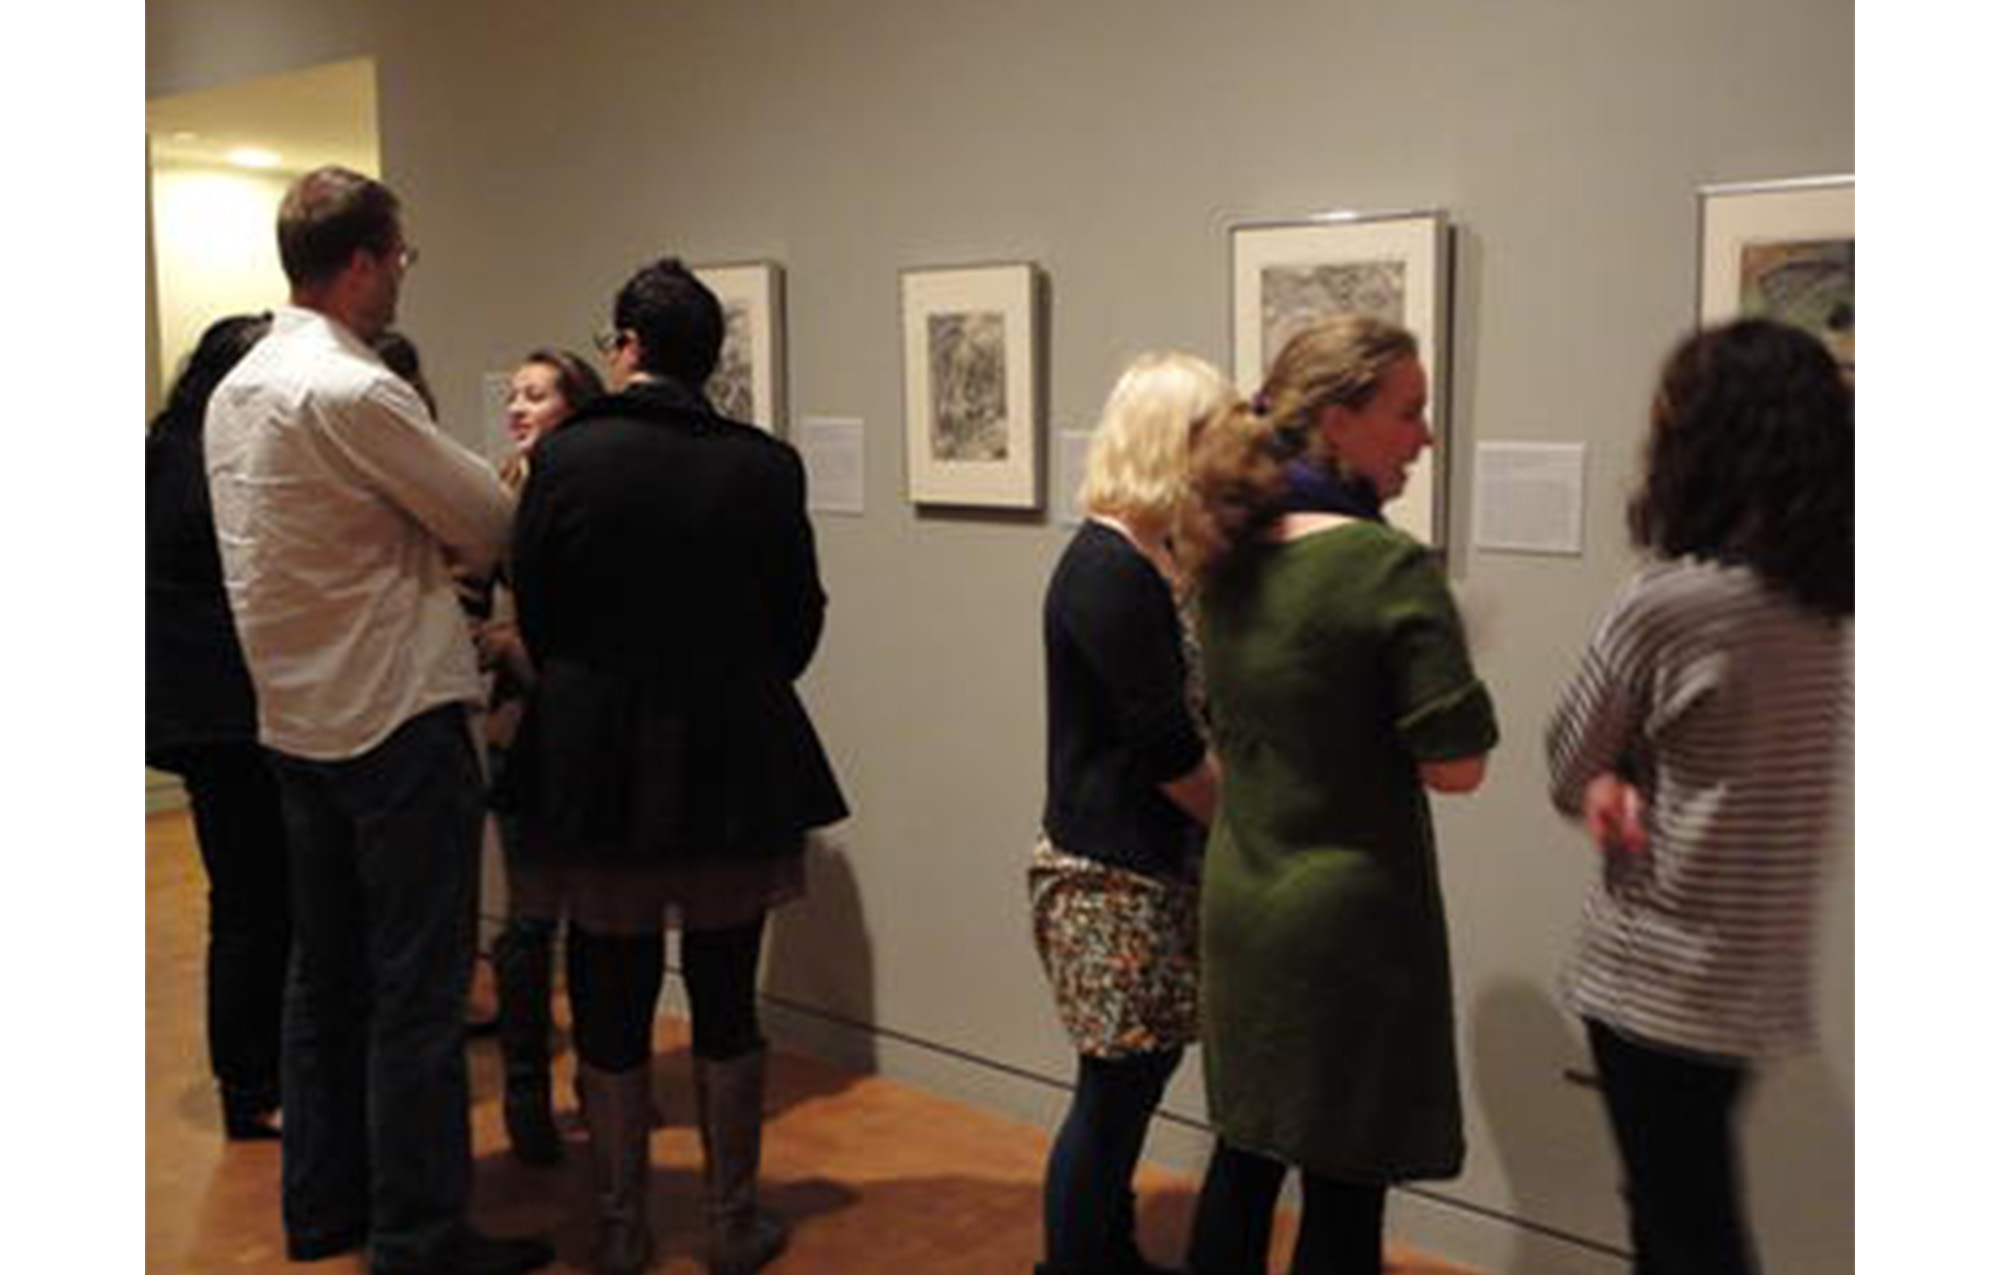 group of people dressed in formal clothing, looking at prints on a gray wall in an art gallery